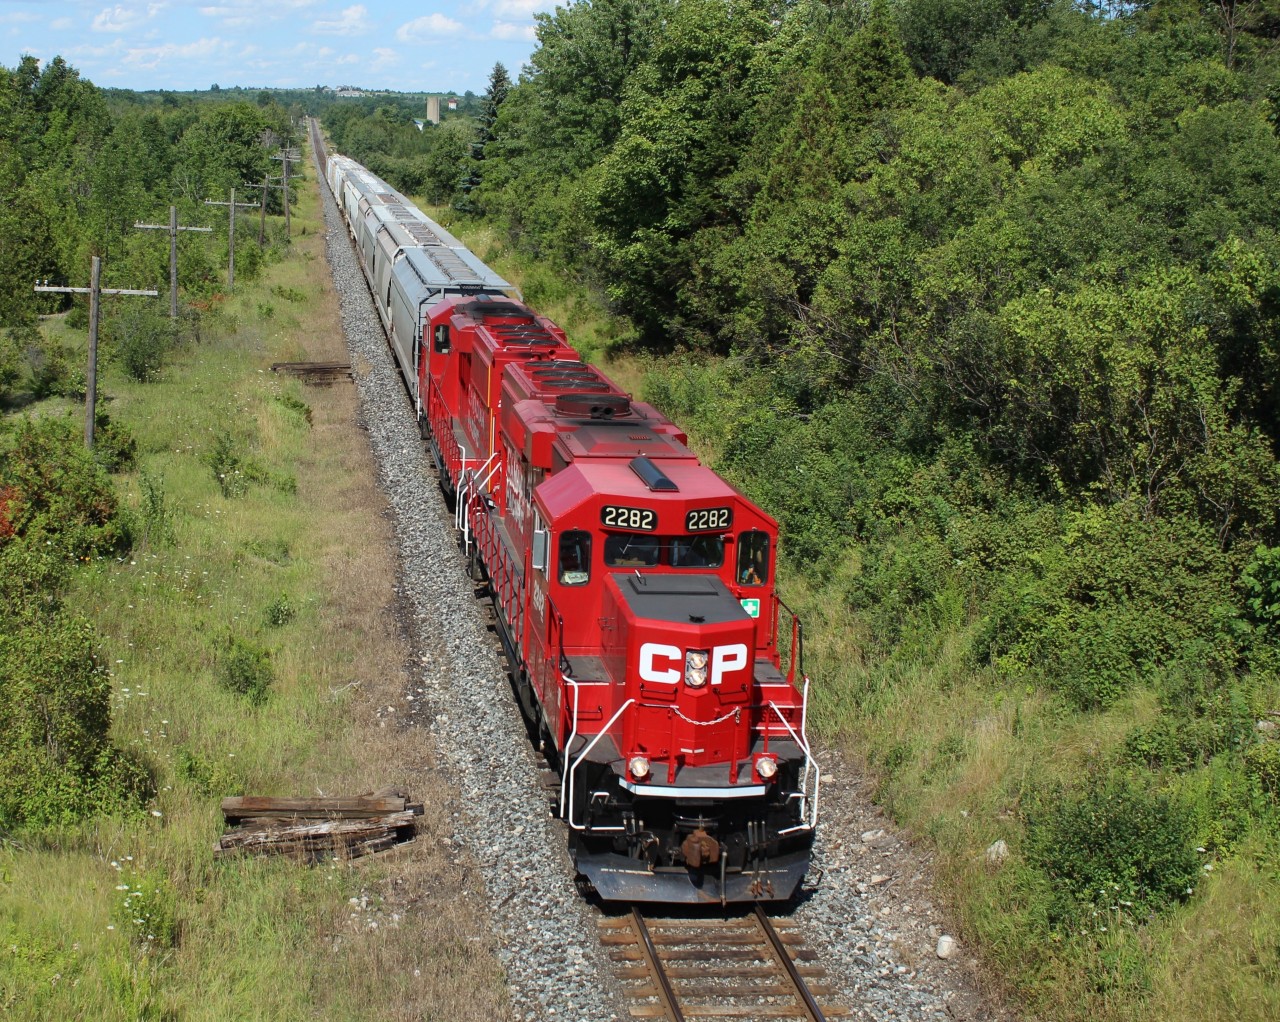 An exceptionally clean CP 2282 leads CP 2257 up to the Highway 6 overpass at MM 44.9 on the Galt sub heading west cleared to Wolverton with a small load of hopper cars.